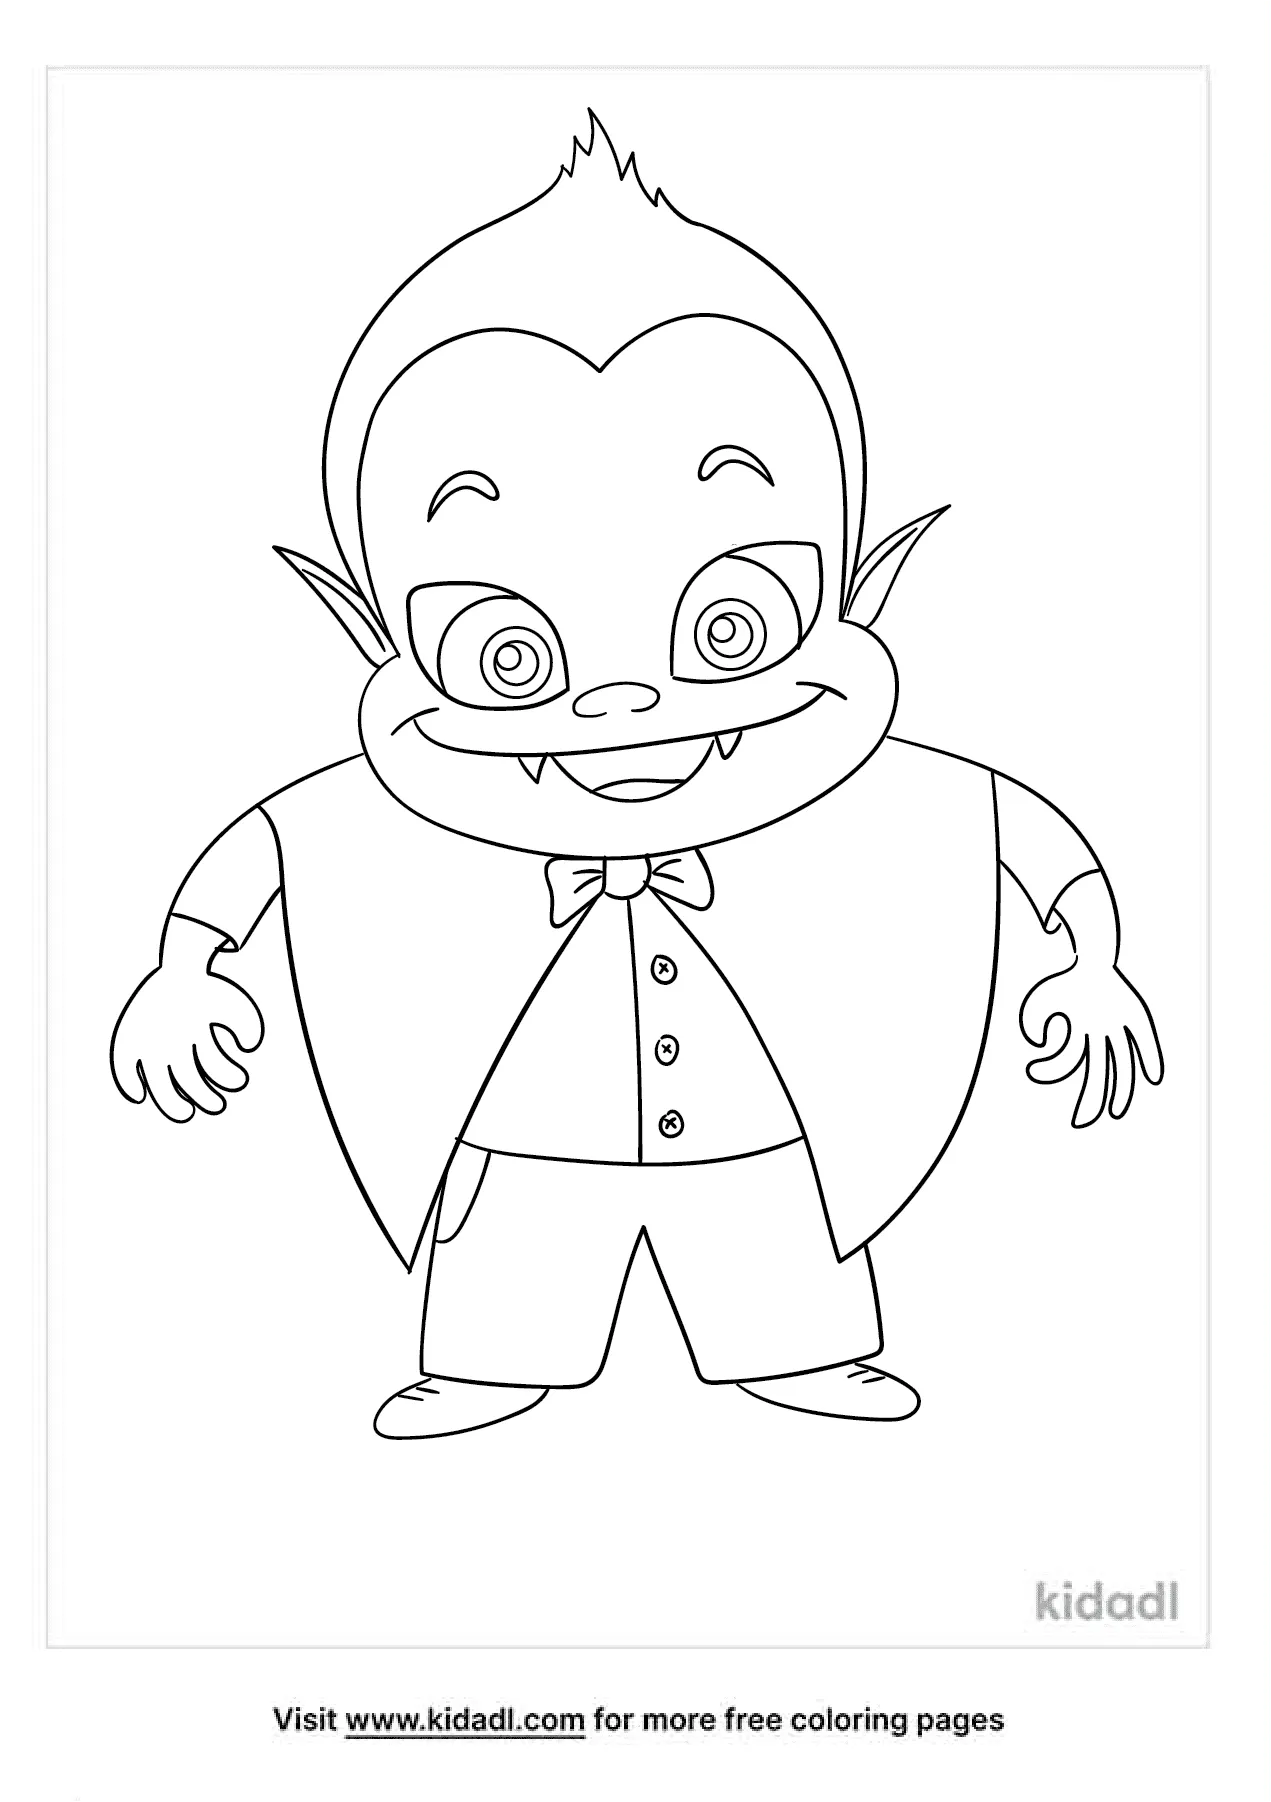 cute vampire coloring pages